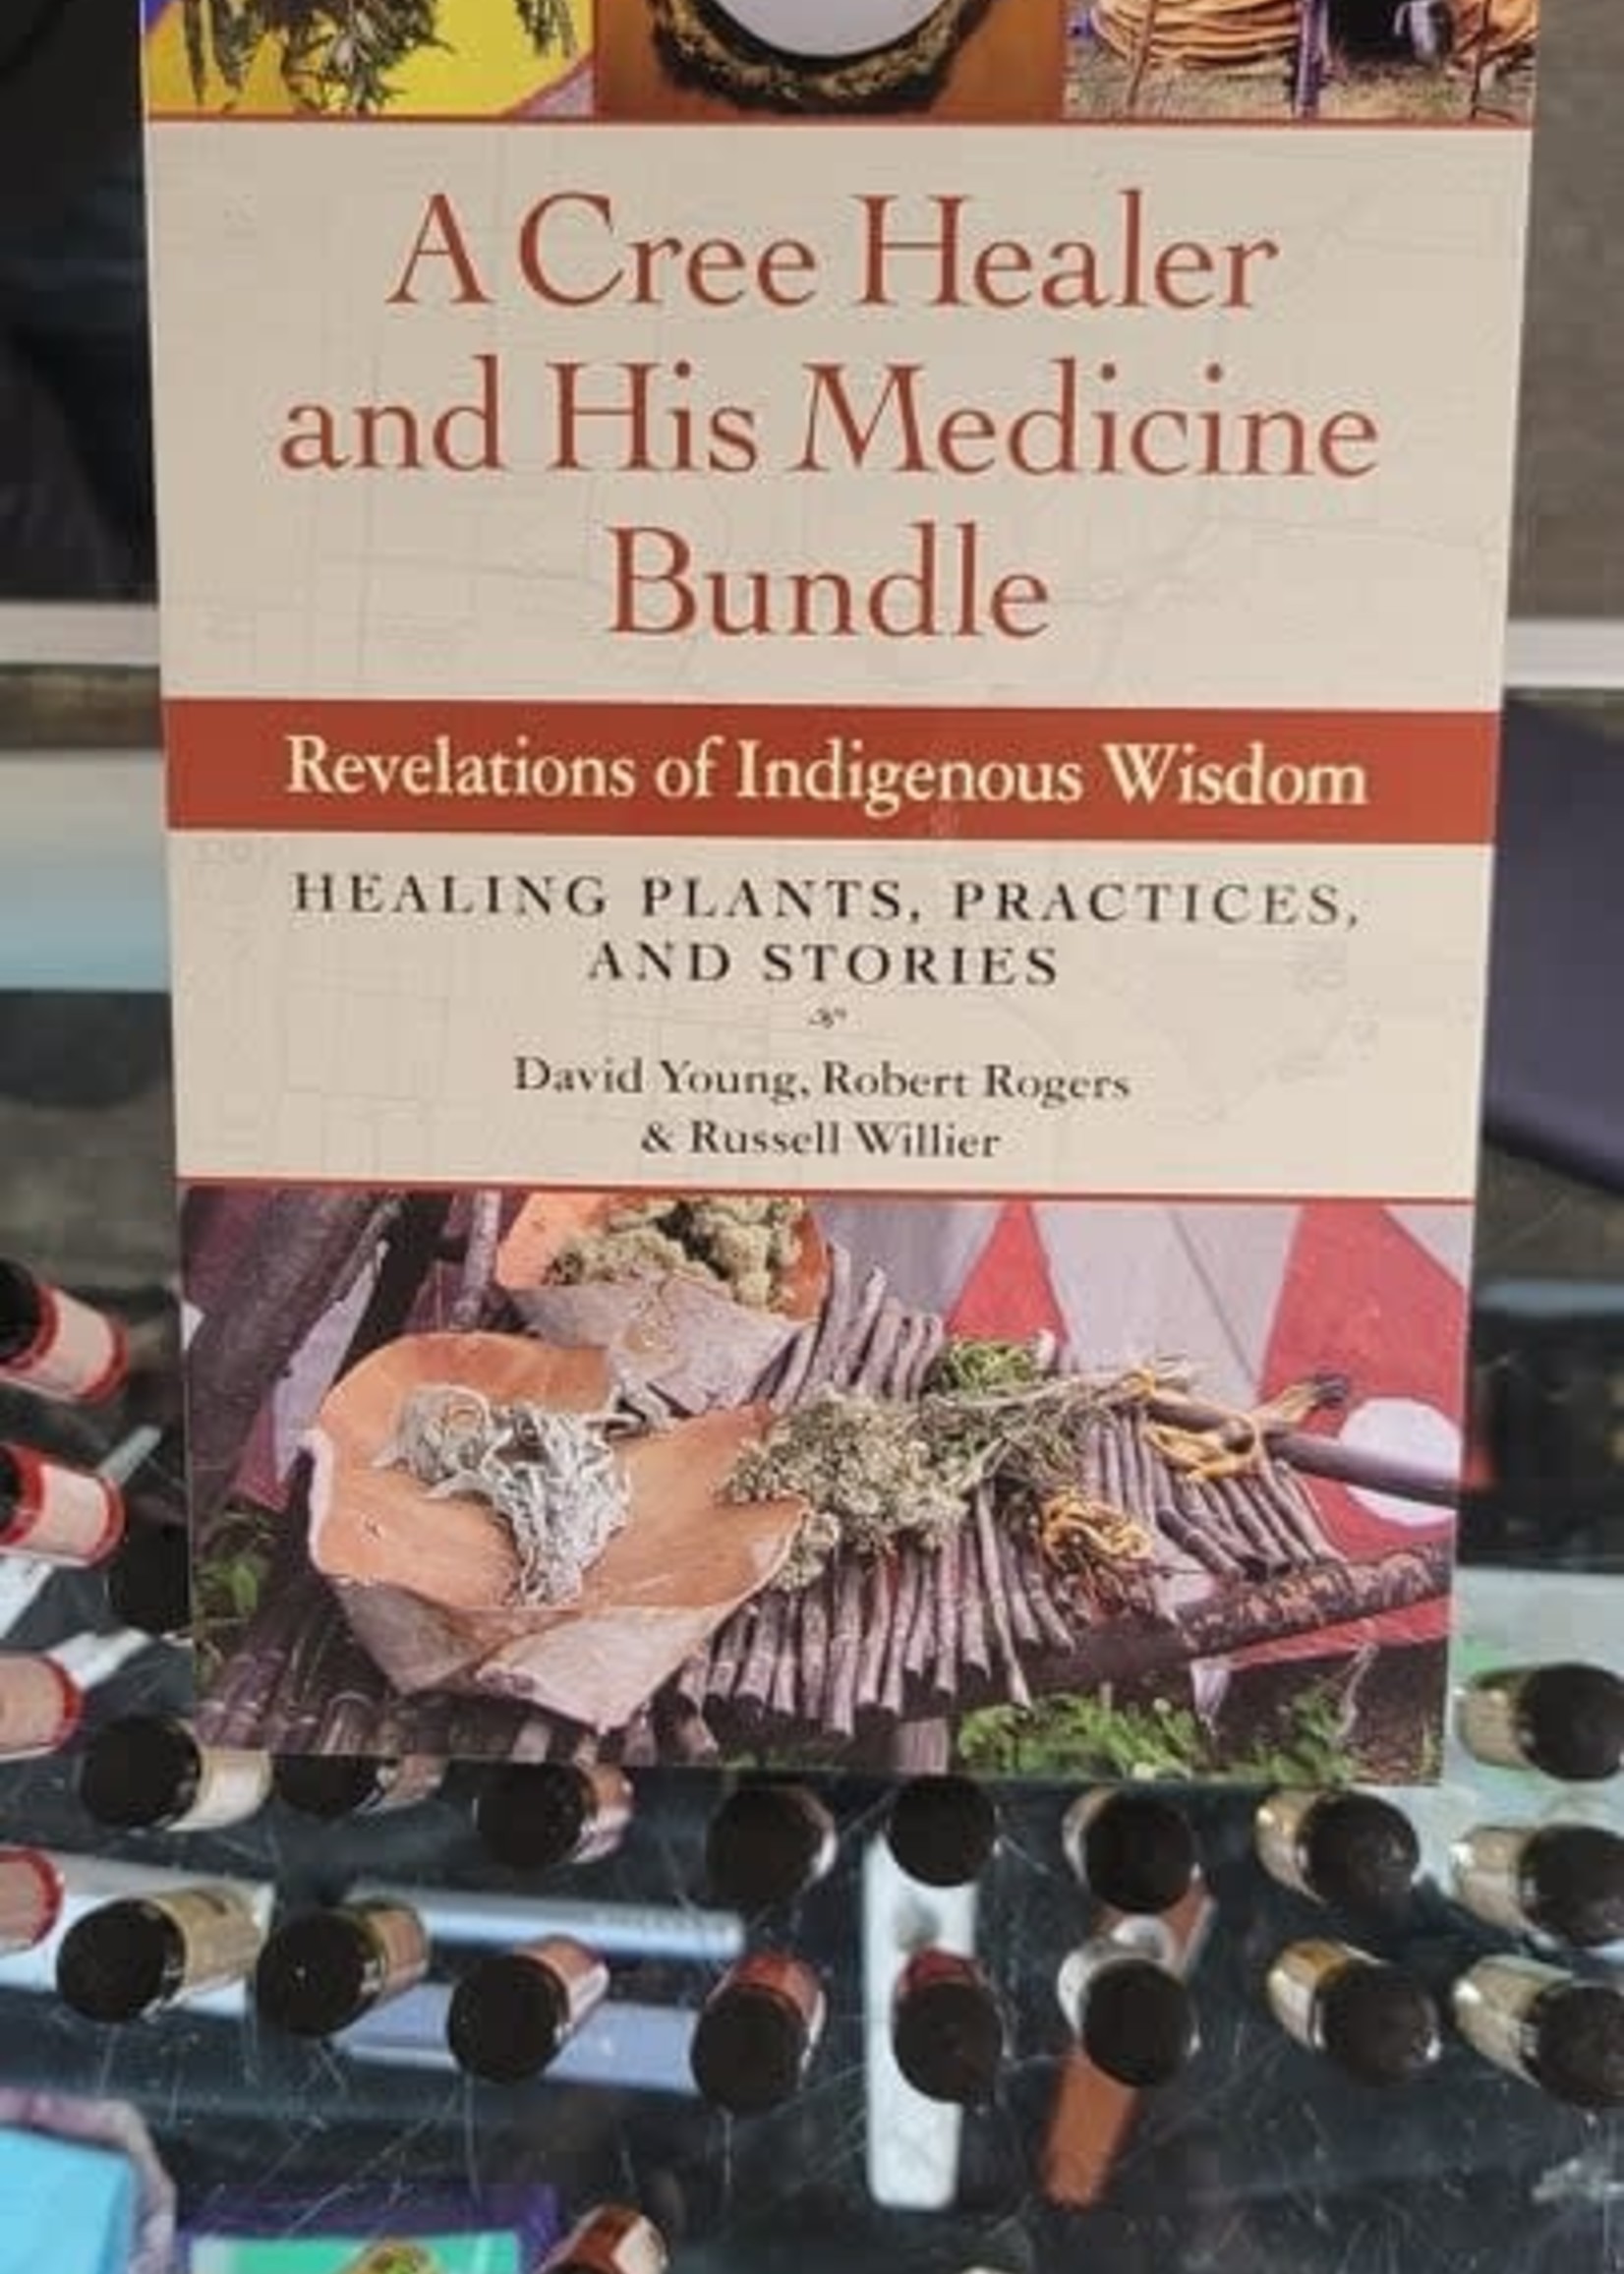 A Cree Healer and His Medicine Bundle-DAVID YOUNG, ROBERT ROGERS and RUSSELL WILLIER